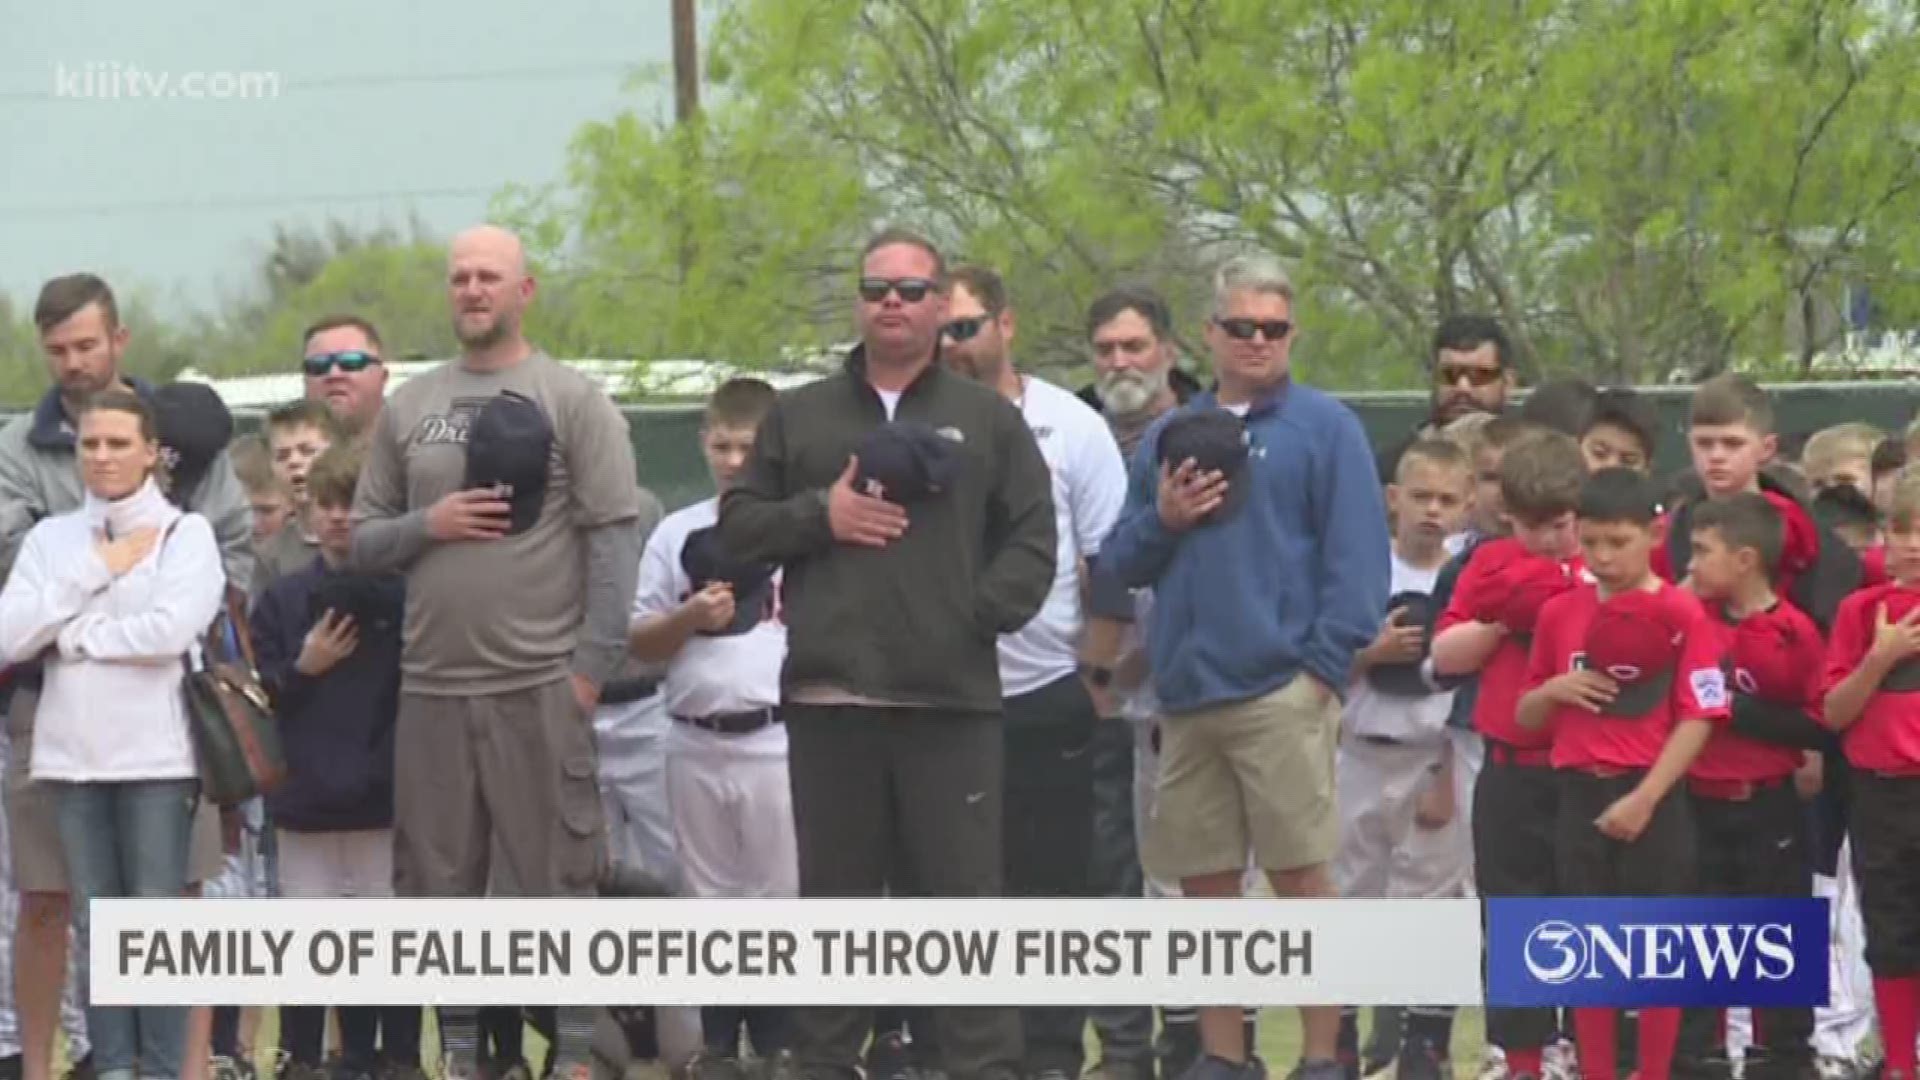 The wife and daughter of Officer Alan McCollum threw out the ceremonial first pitch that kicks off the little league season.